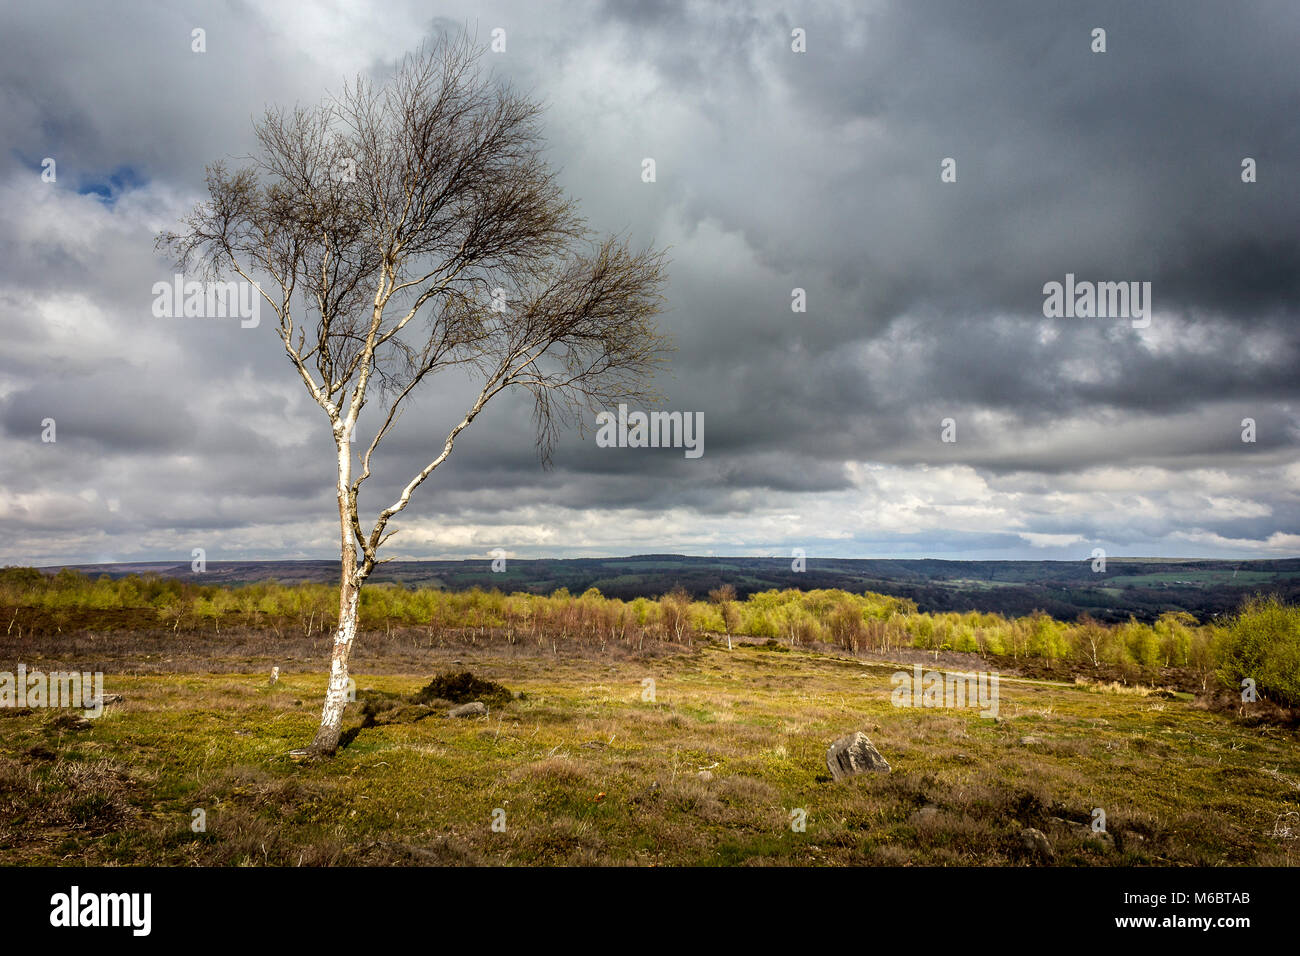 A storm approaches on Stanton Moor in the English Peak District Stock Photo